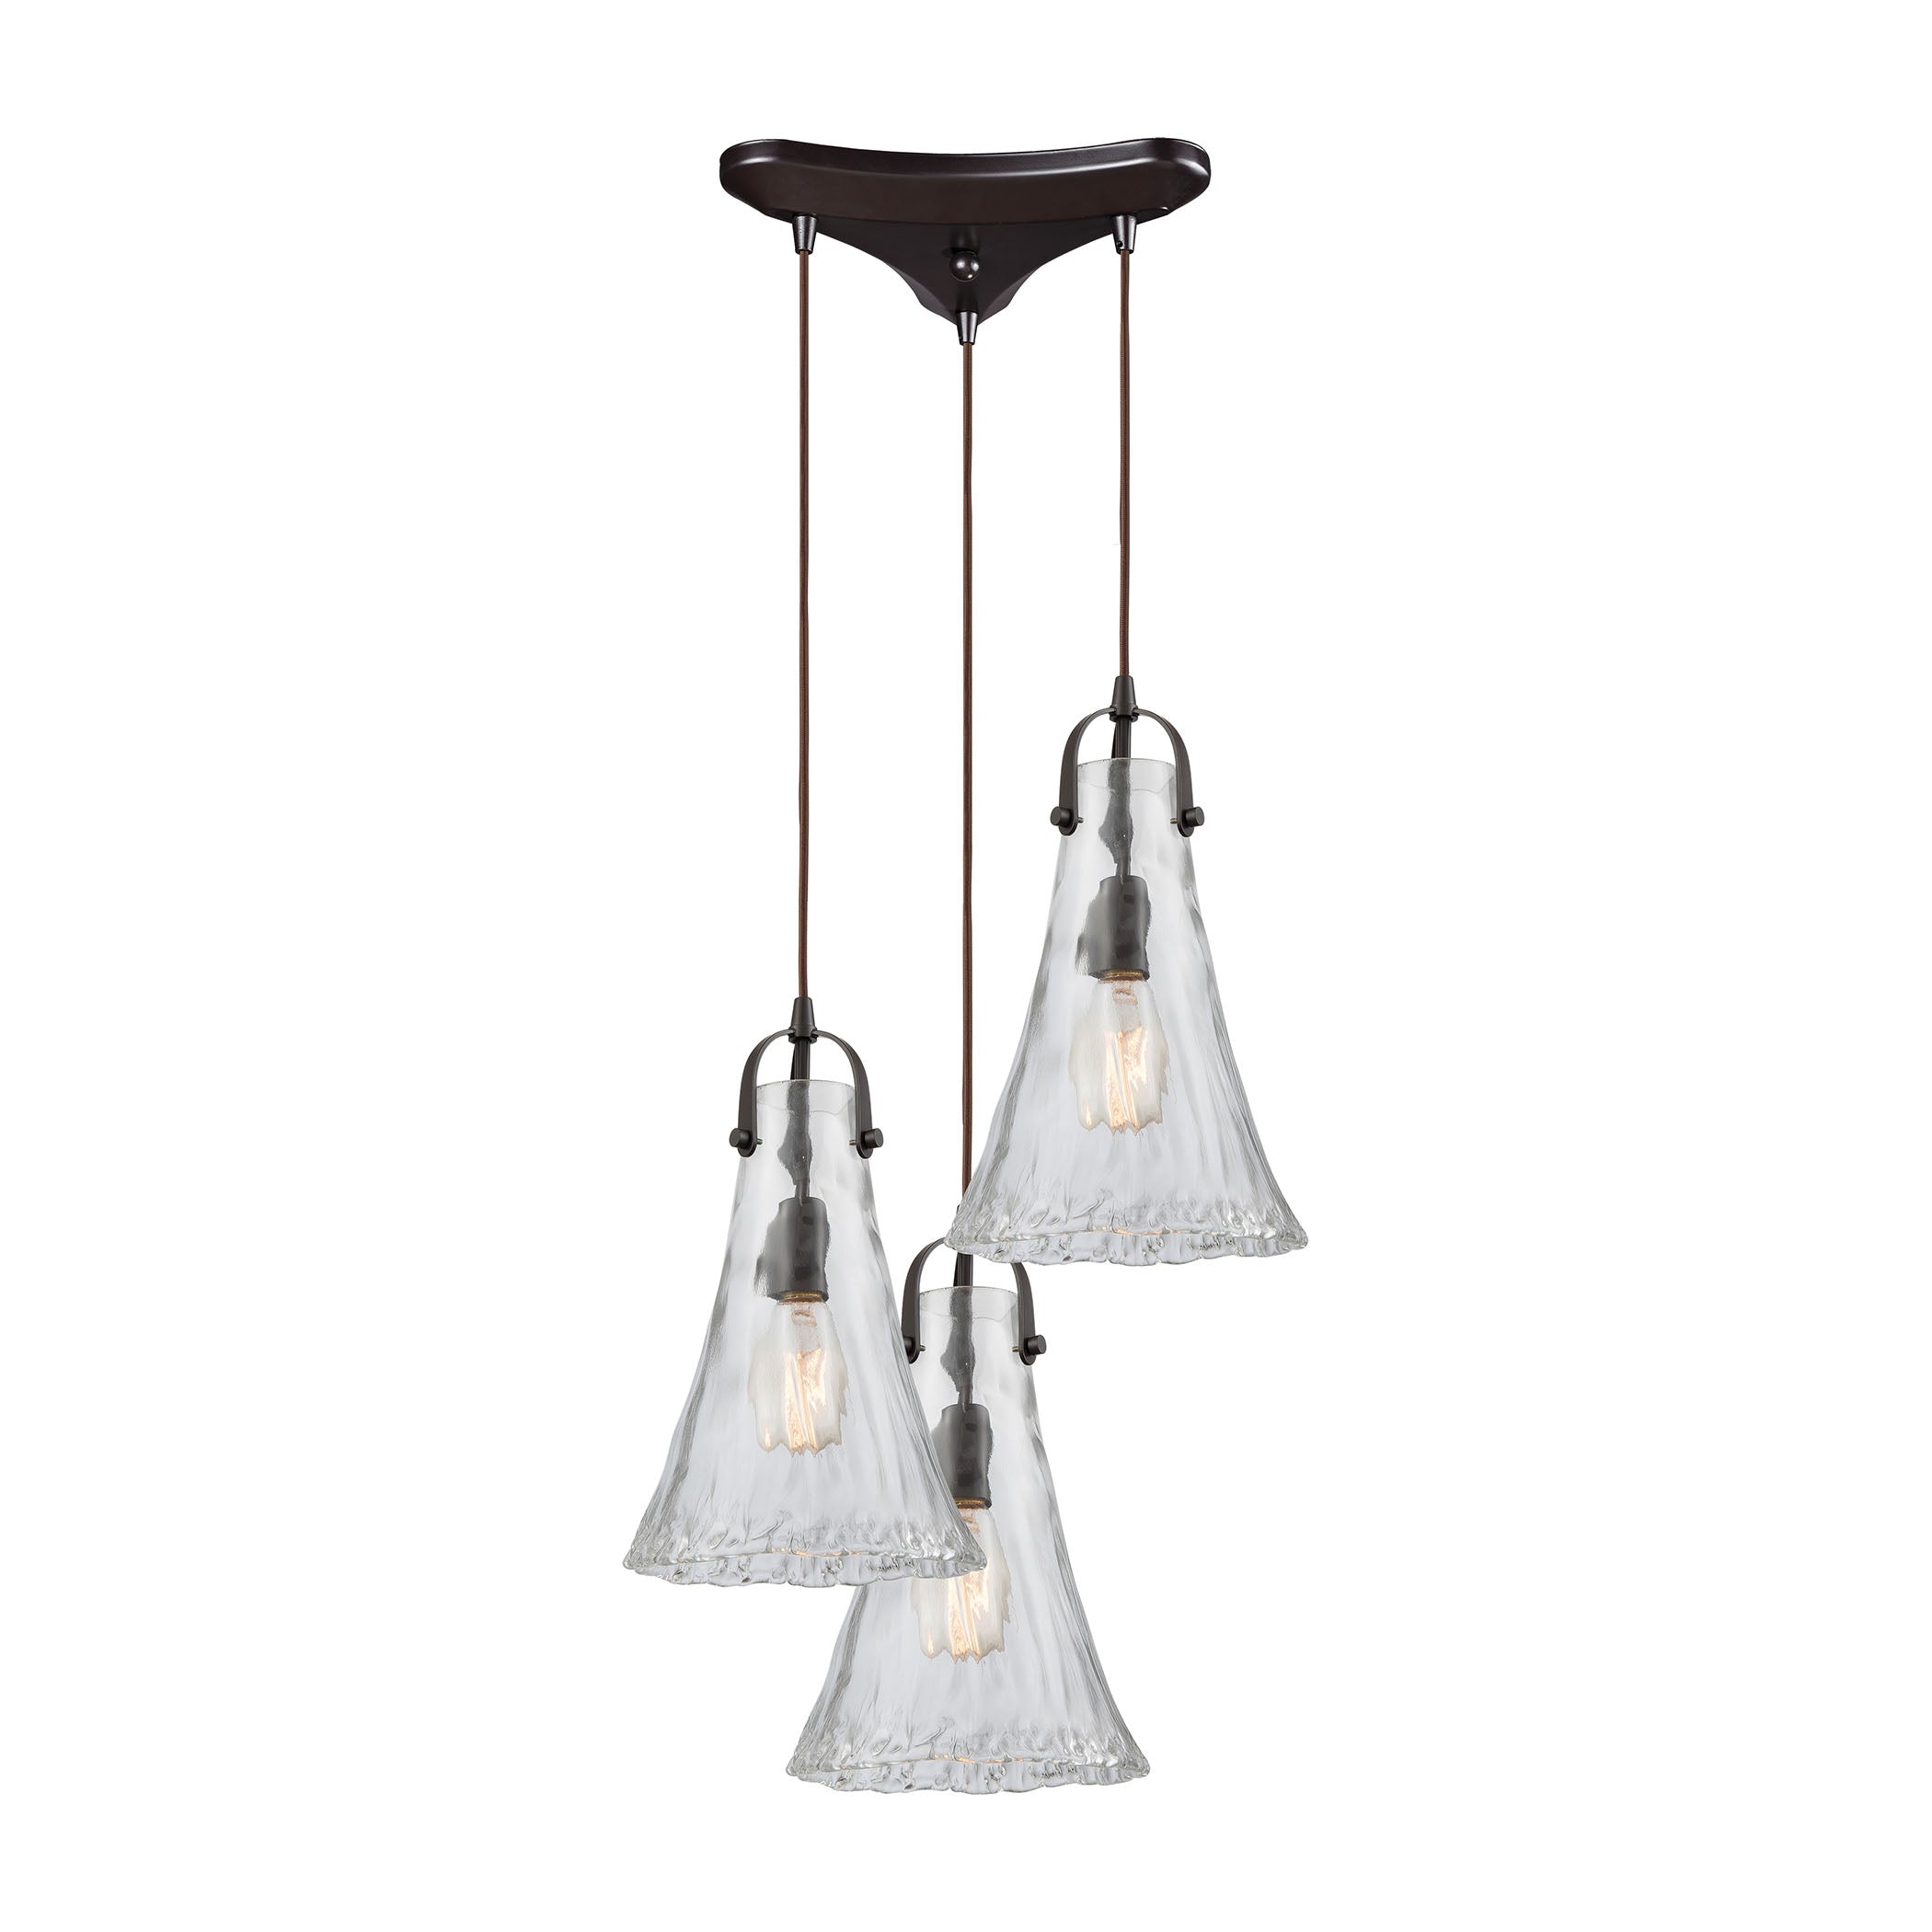 ELK Lighting 10555/3 Hand Formed Glass 3-Light Triangular Pendant Fixture in Oiled Bronze with Clear Hand-formed Glass